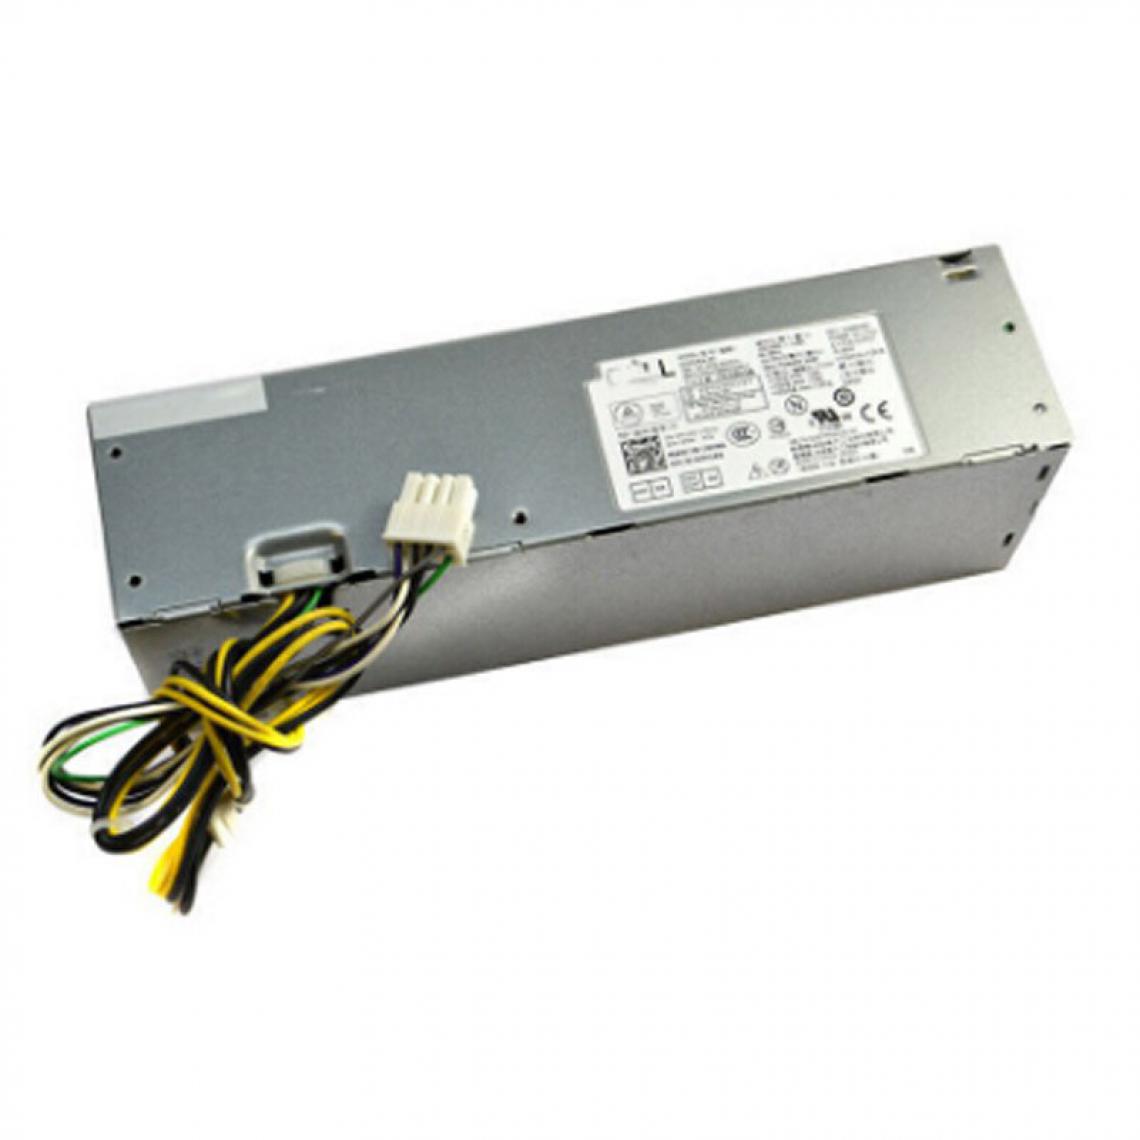 Dell - Alimentation Dell D255AS-00 DPS-255KB A 0FP16X 255W PSU Optiplex 3020 7020 9020 - Alimentation modulaire